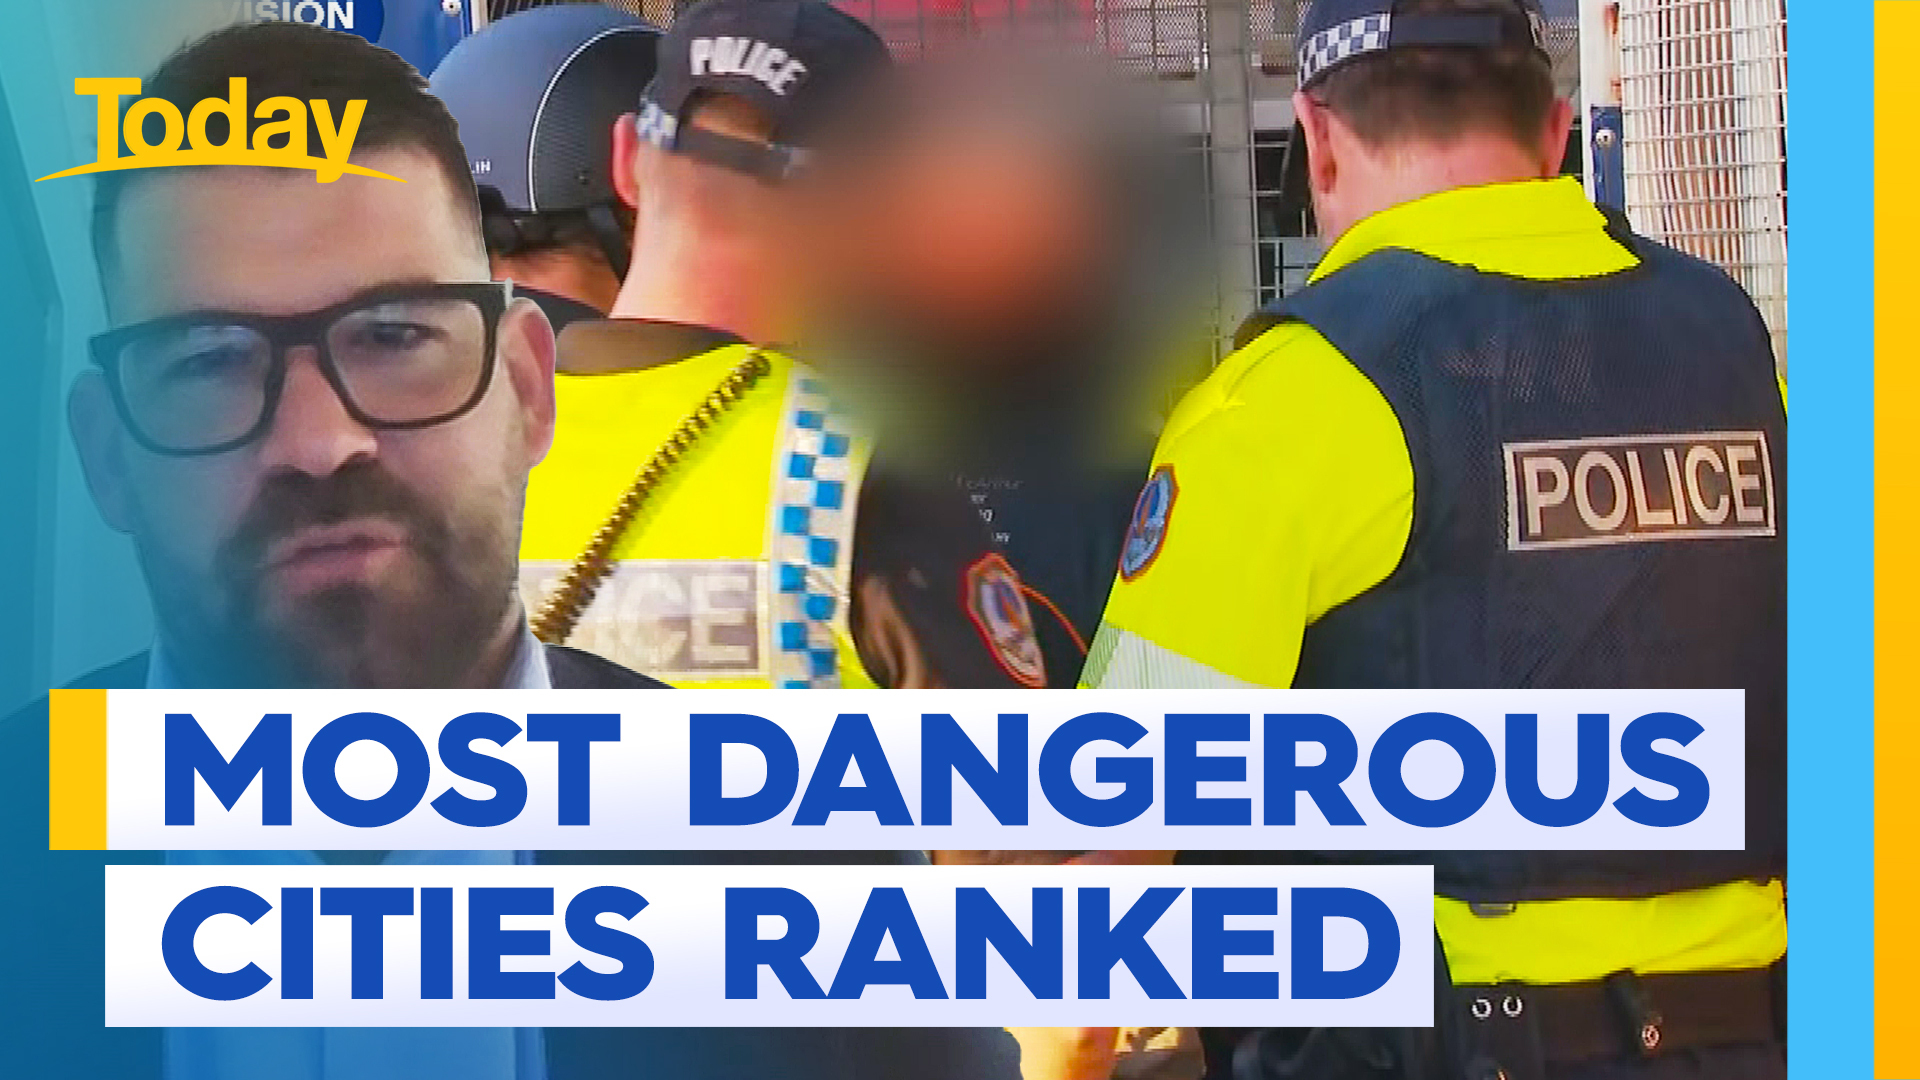 Alice Springs ranked 18th most dangerous city in the world